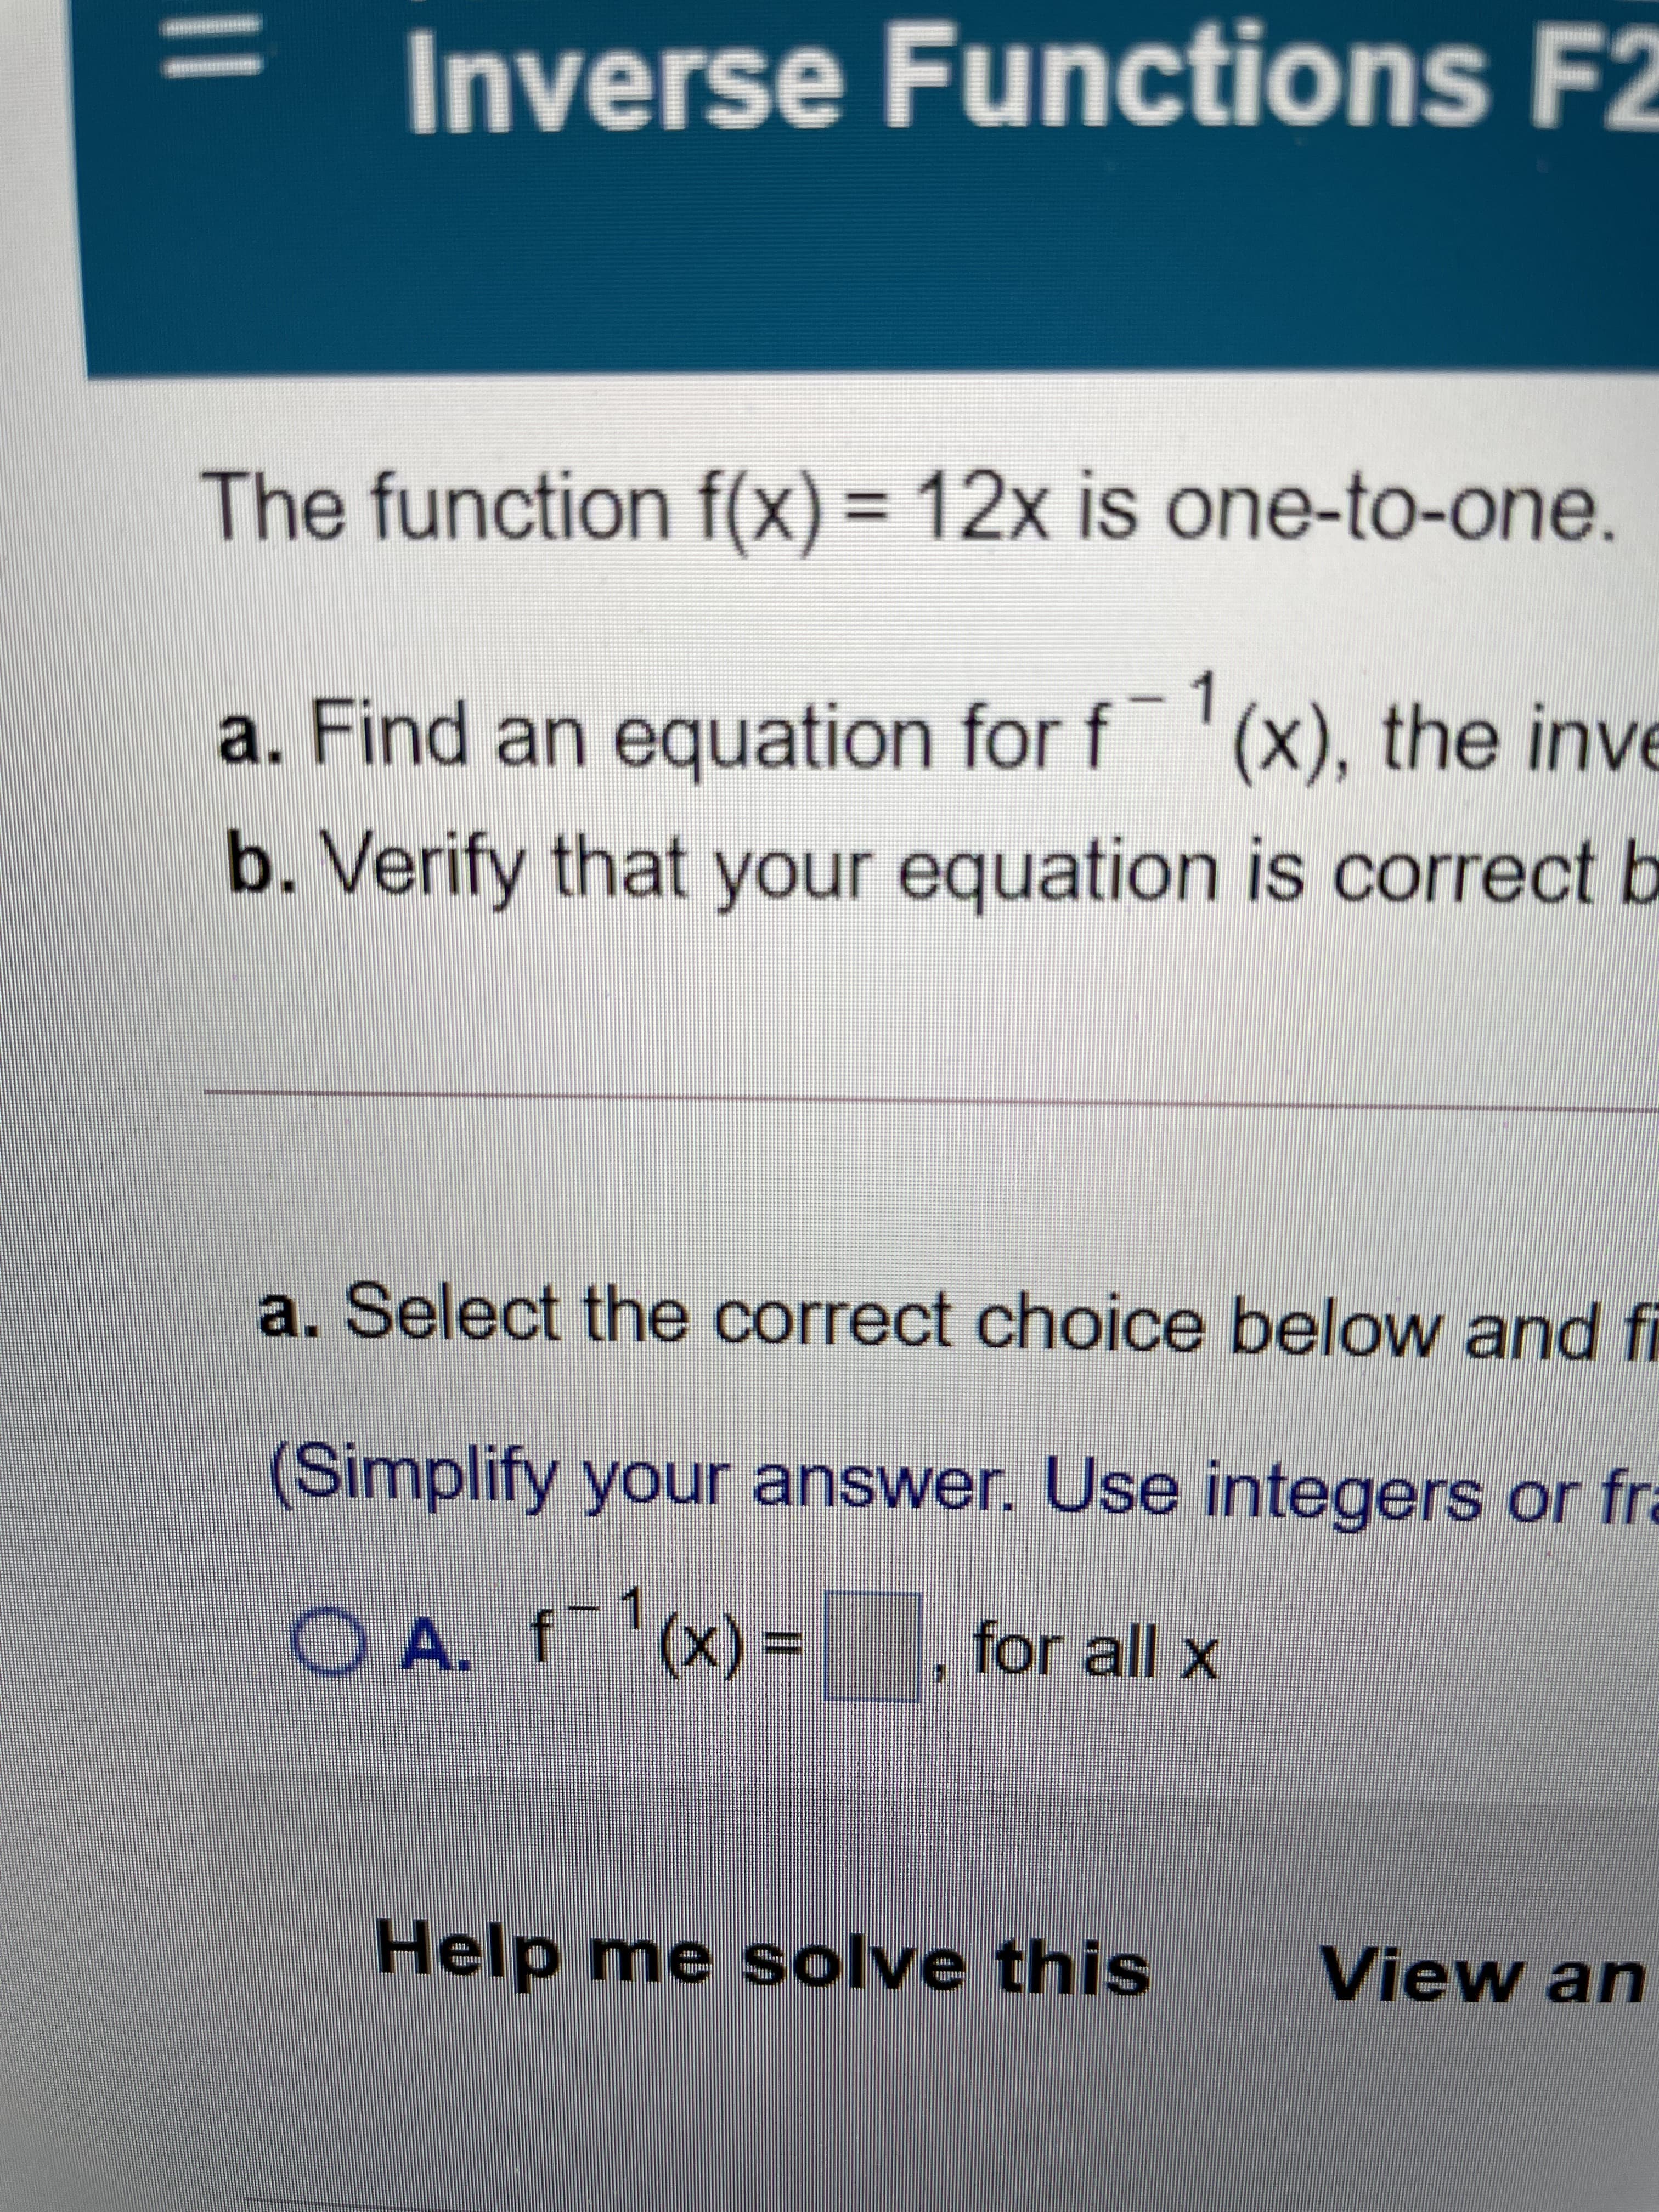 |3|
Inverse Functions F2
suo
The function f(x) = 12x is one-to-one.
%3D
a. Find an equation for f '(x), the inve
b. Verify that your equation is correct b
a. Select the correct choice below and fi
(Simplify your answer. Use integers or fra
O A. f(x) =
for all x
1.
%3D
Help me solve this
View an
